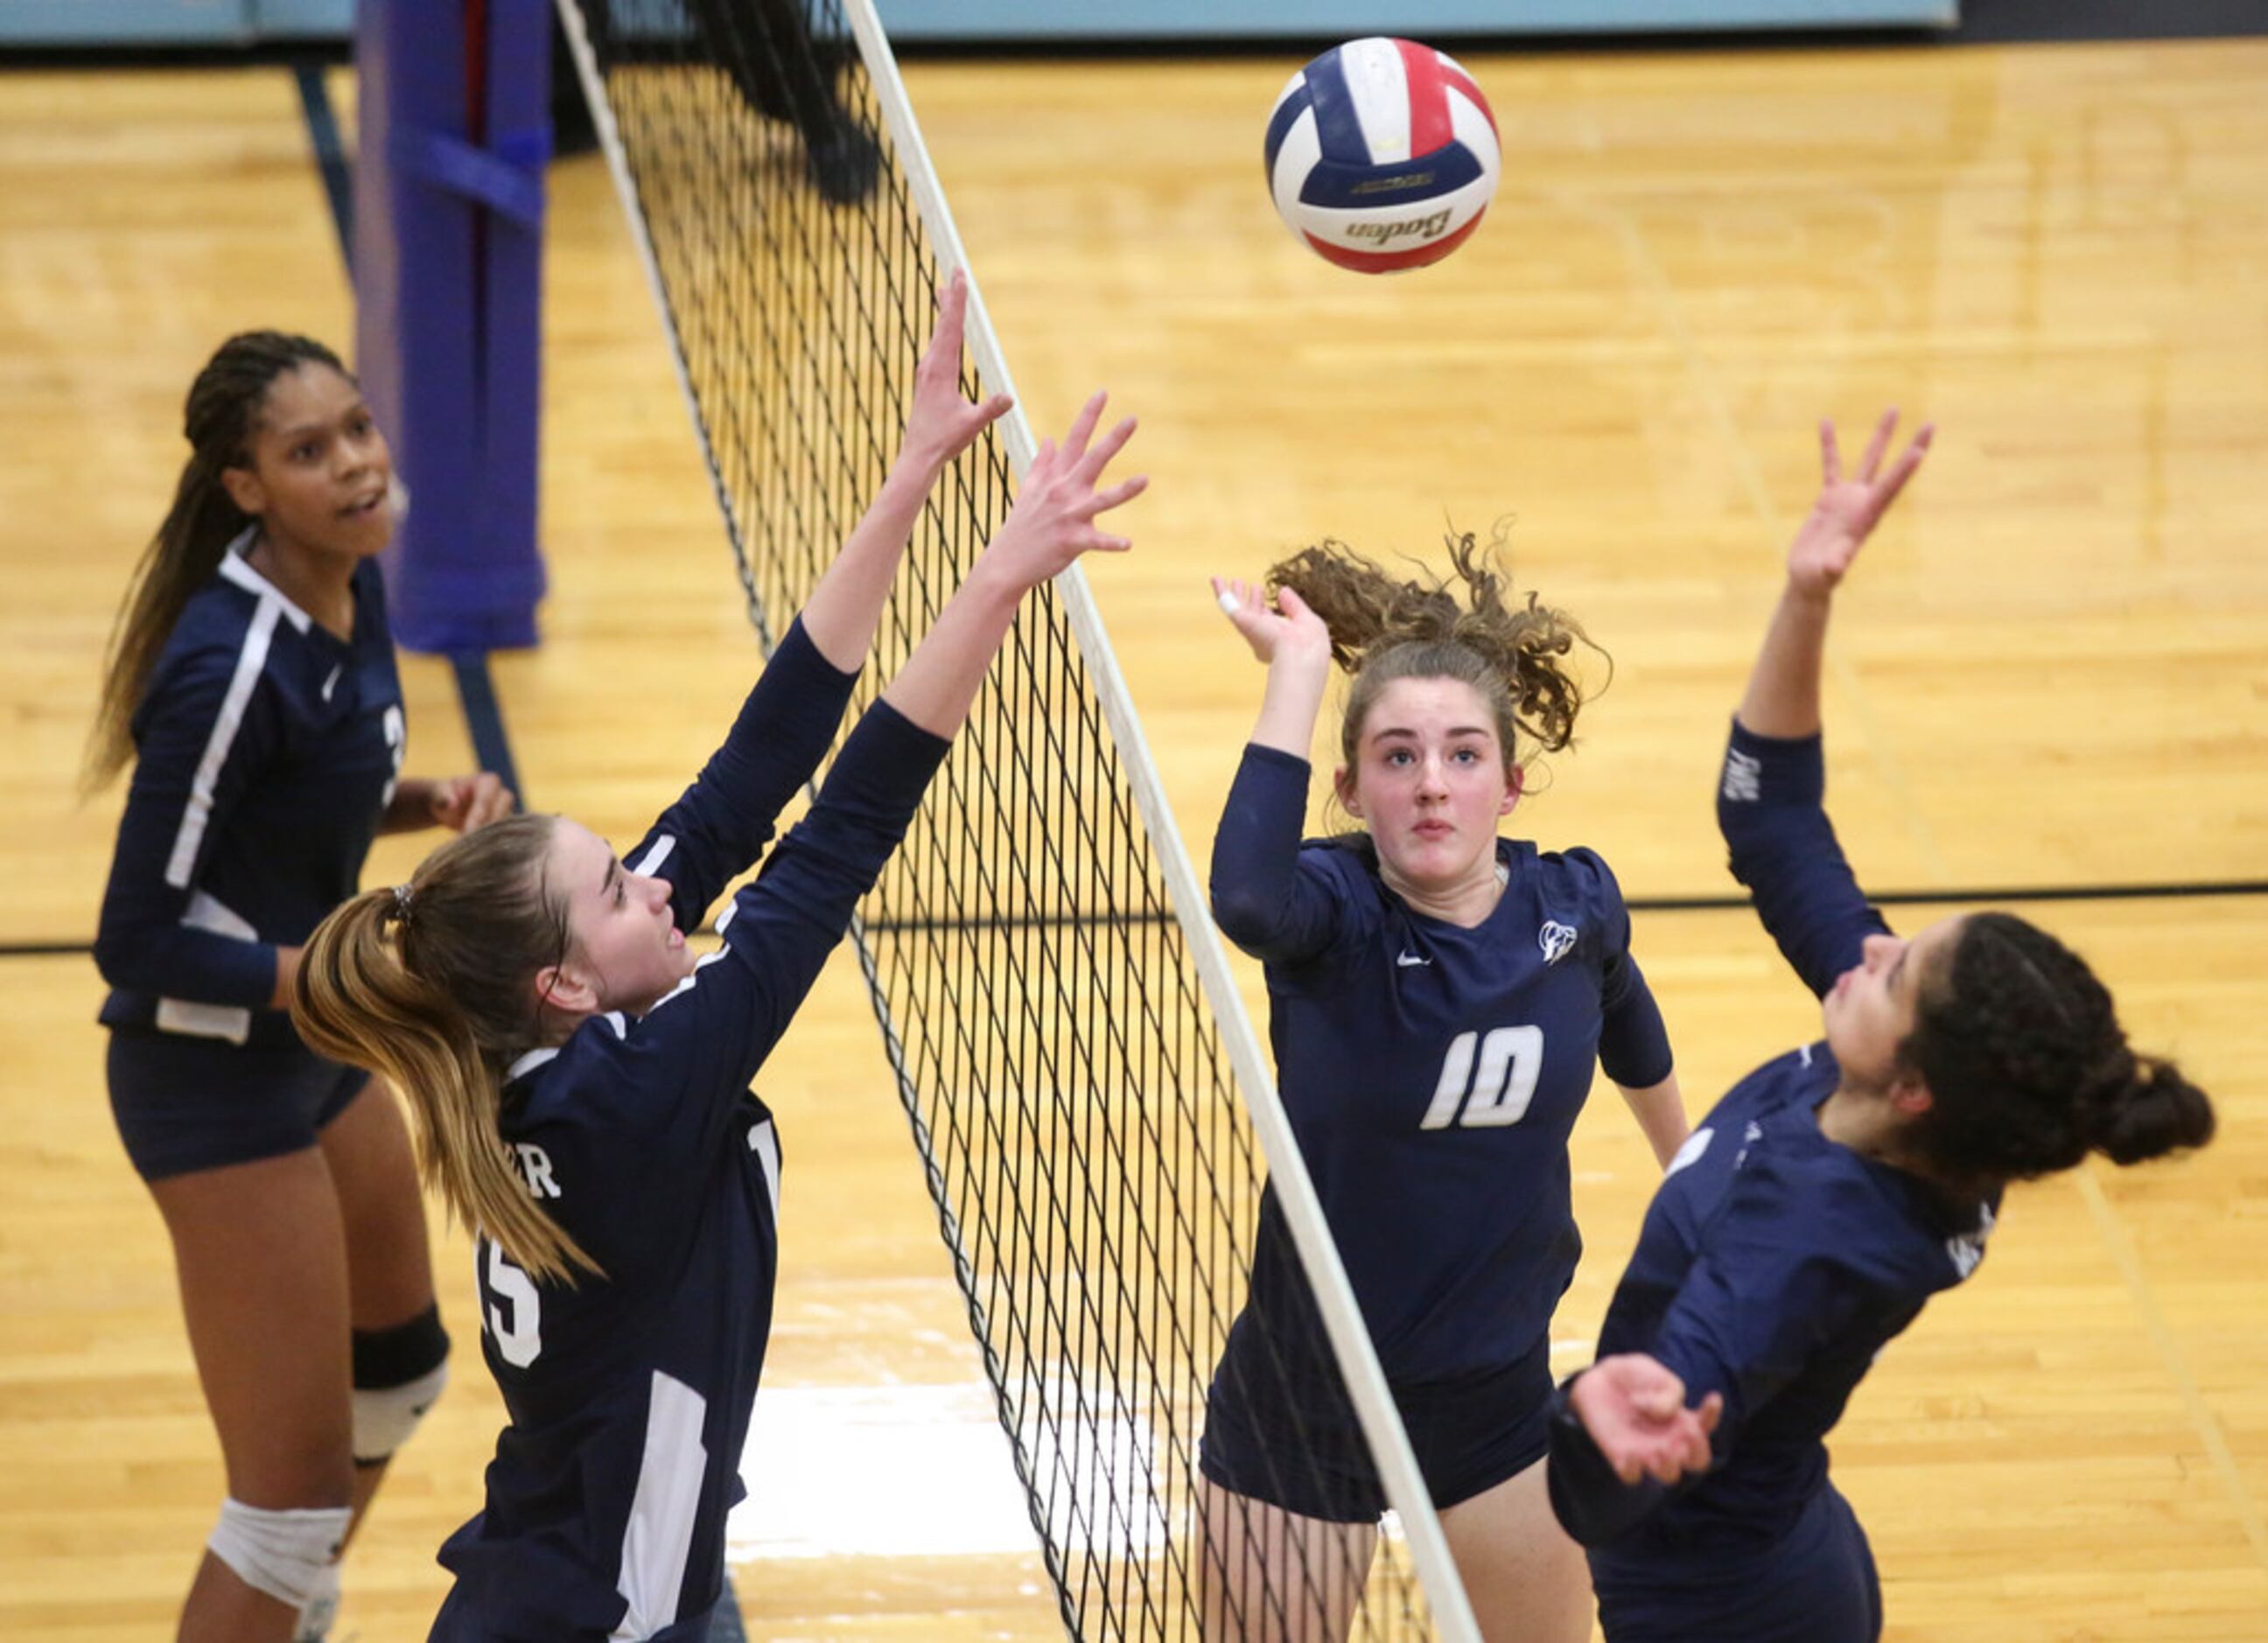 Megan Farris (10) of Flower Mound sets up the ball for her teammate during a high school...